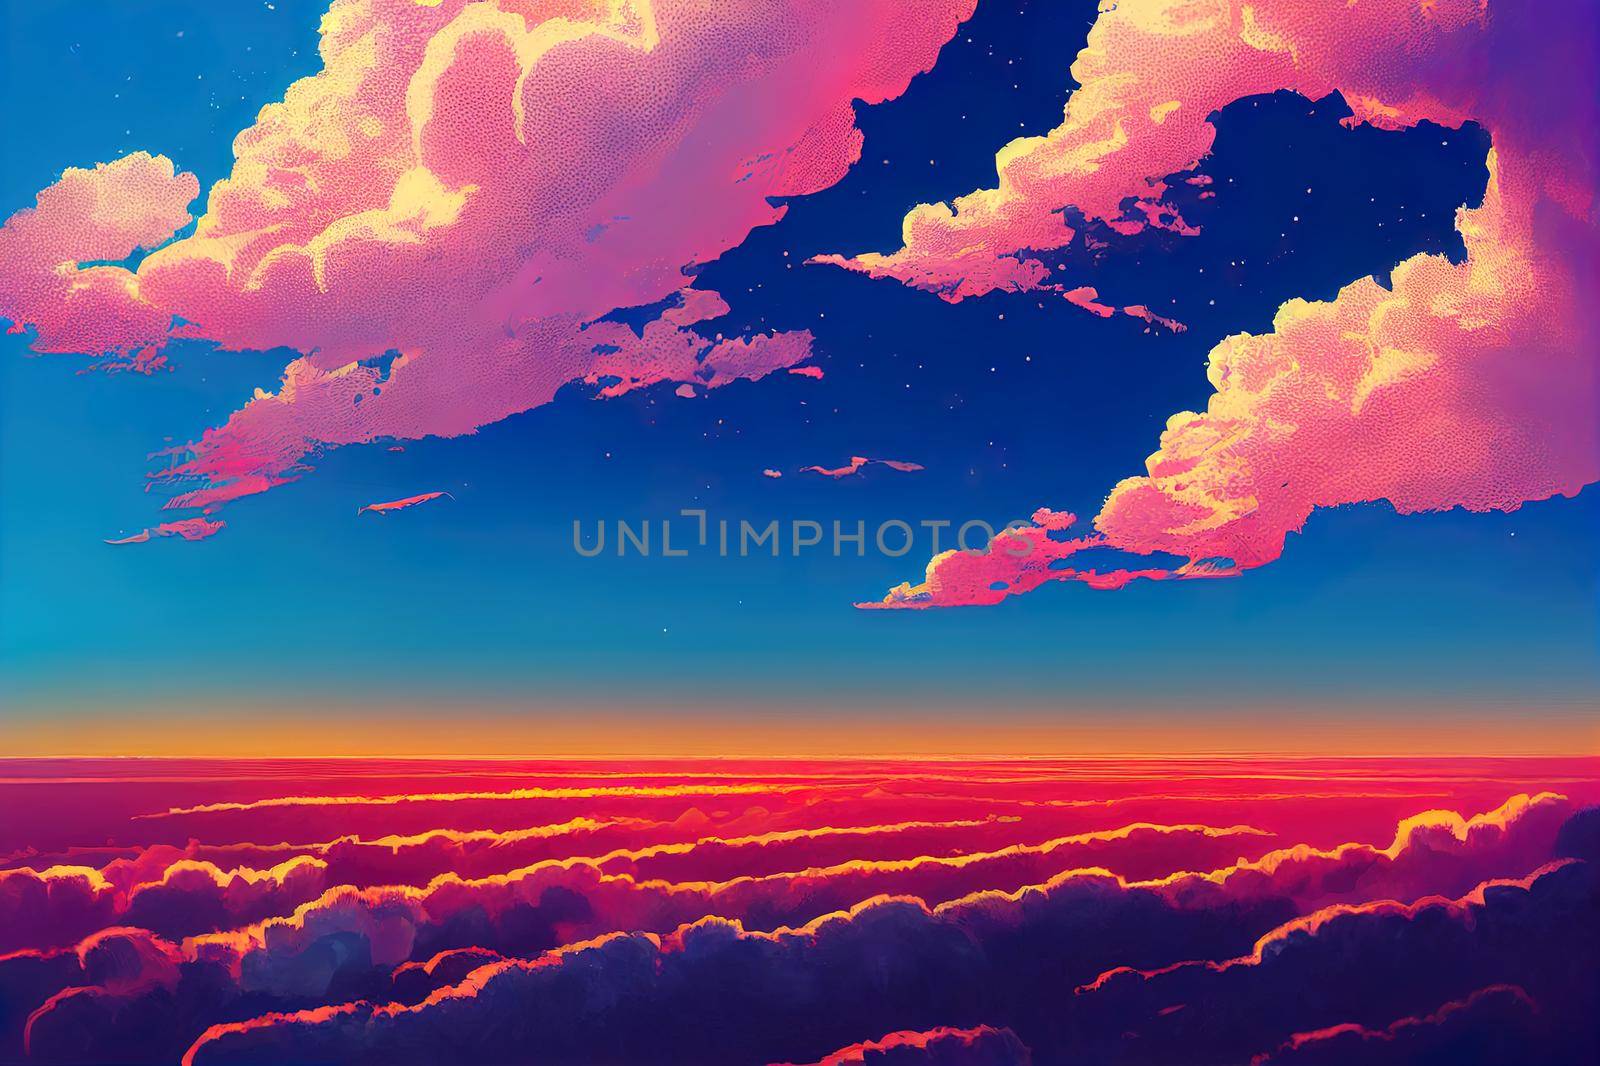 sky with clouds and sun. High quality illustration